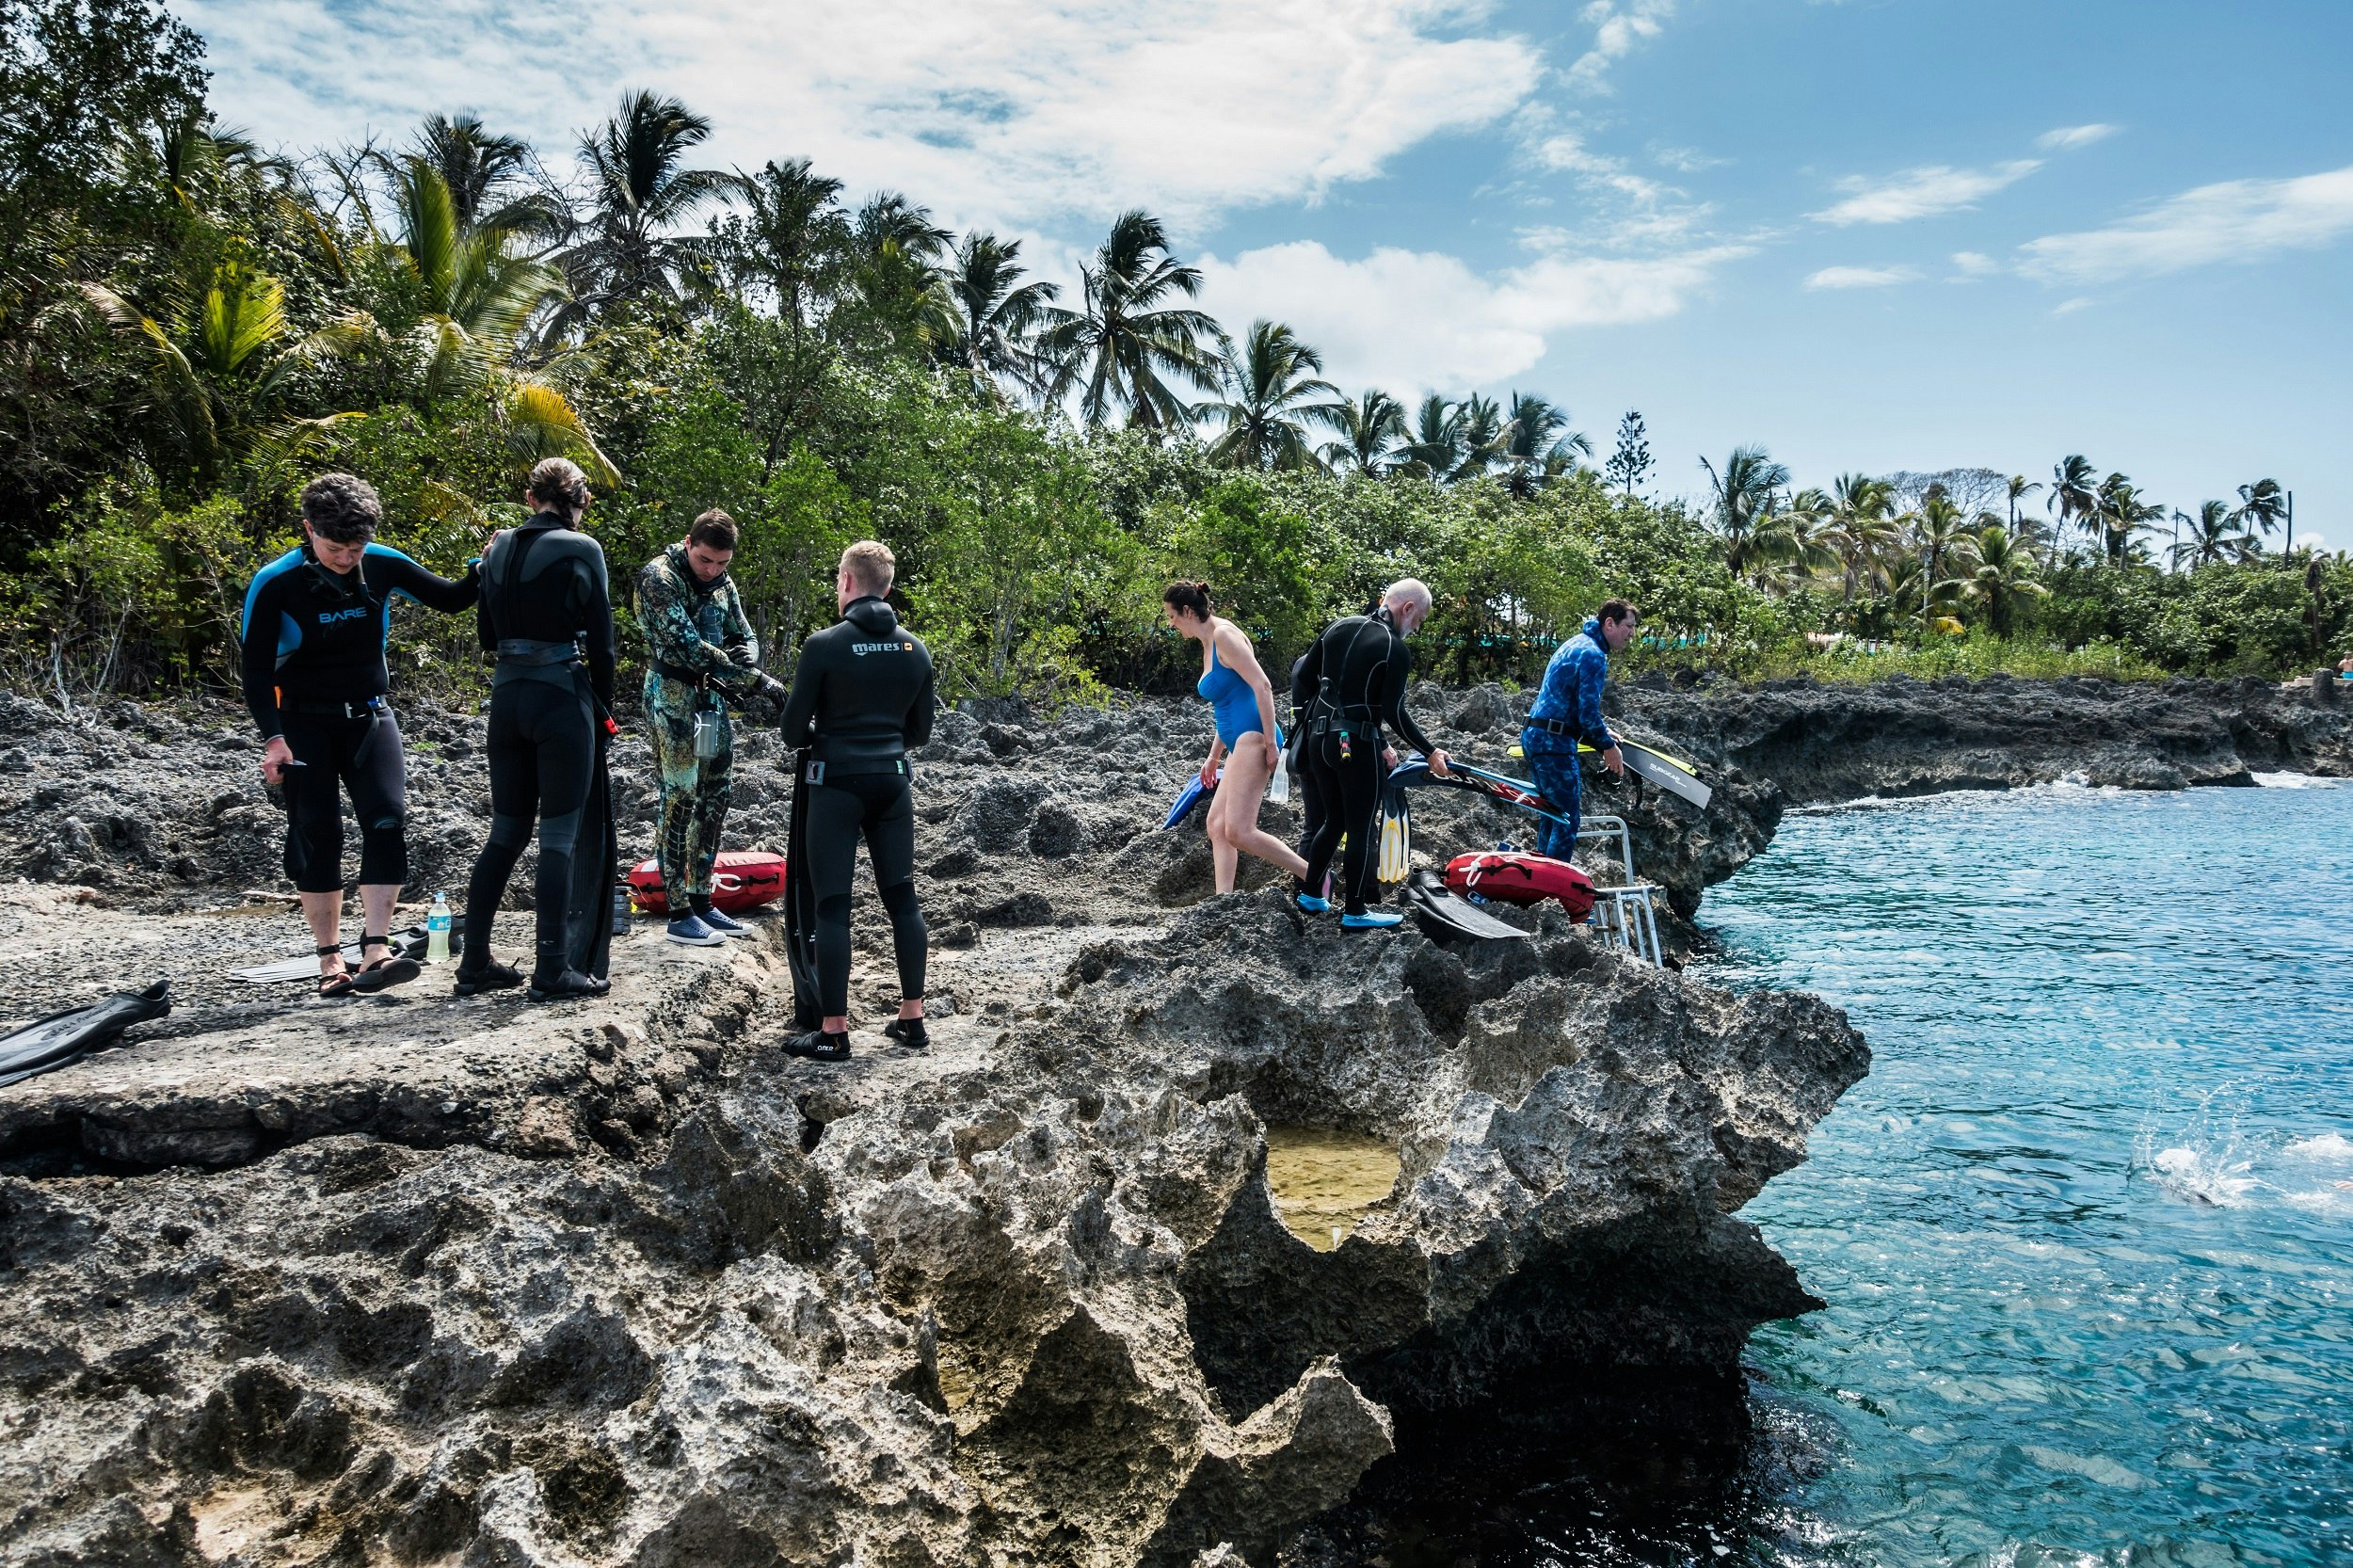 A group of free divers stands on a rocky outcrop that teeters out over the ocean; they are preparing to enter the water on the rocky shore of San Andres Island.